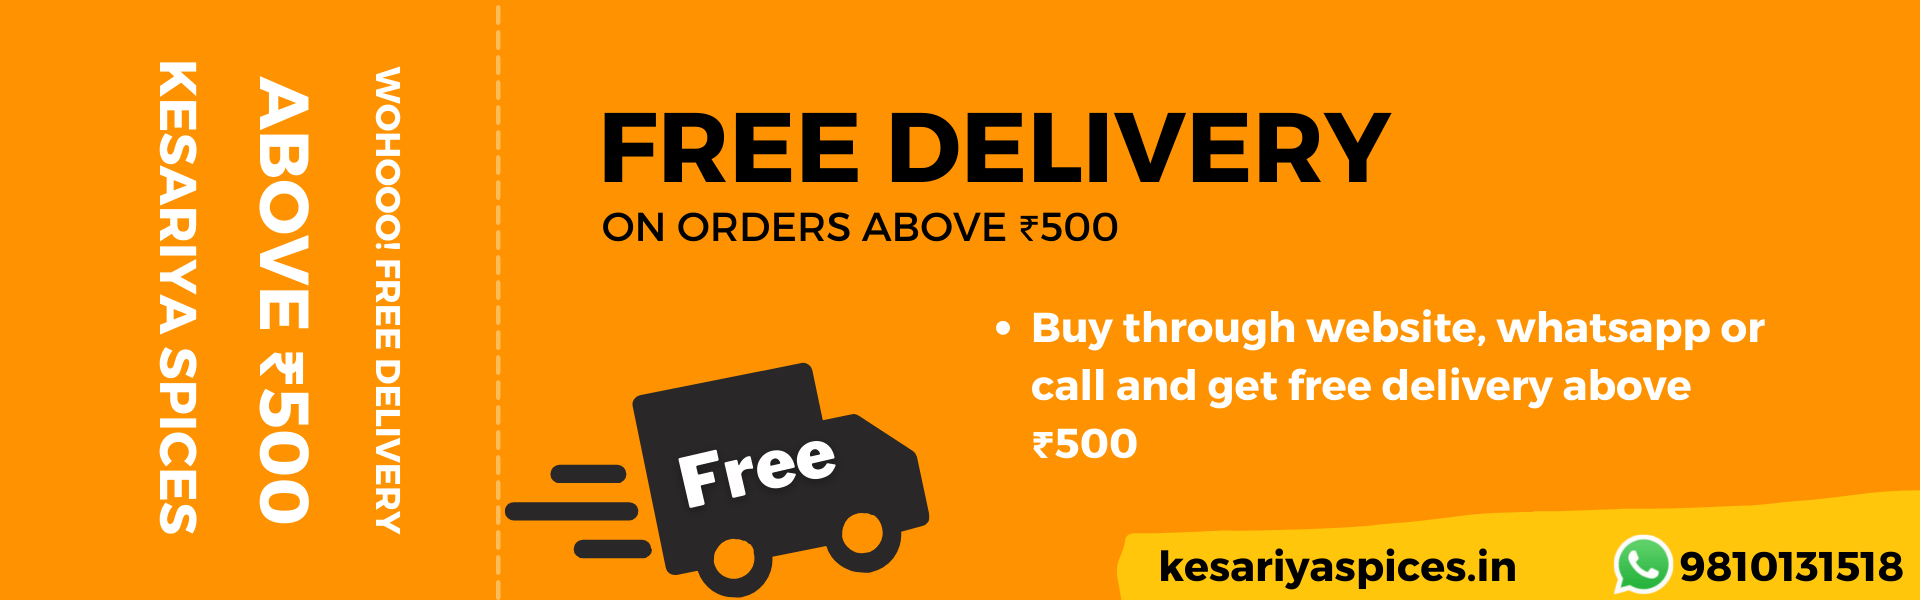 Free delivery by Kesariya spices